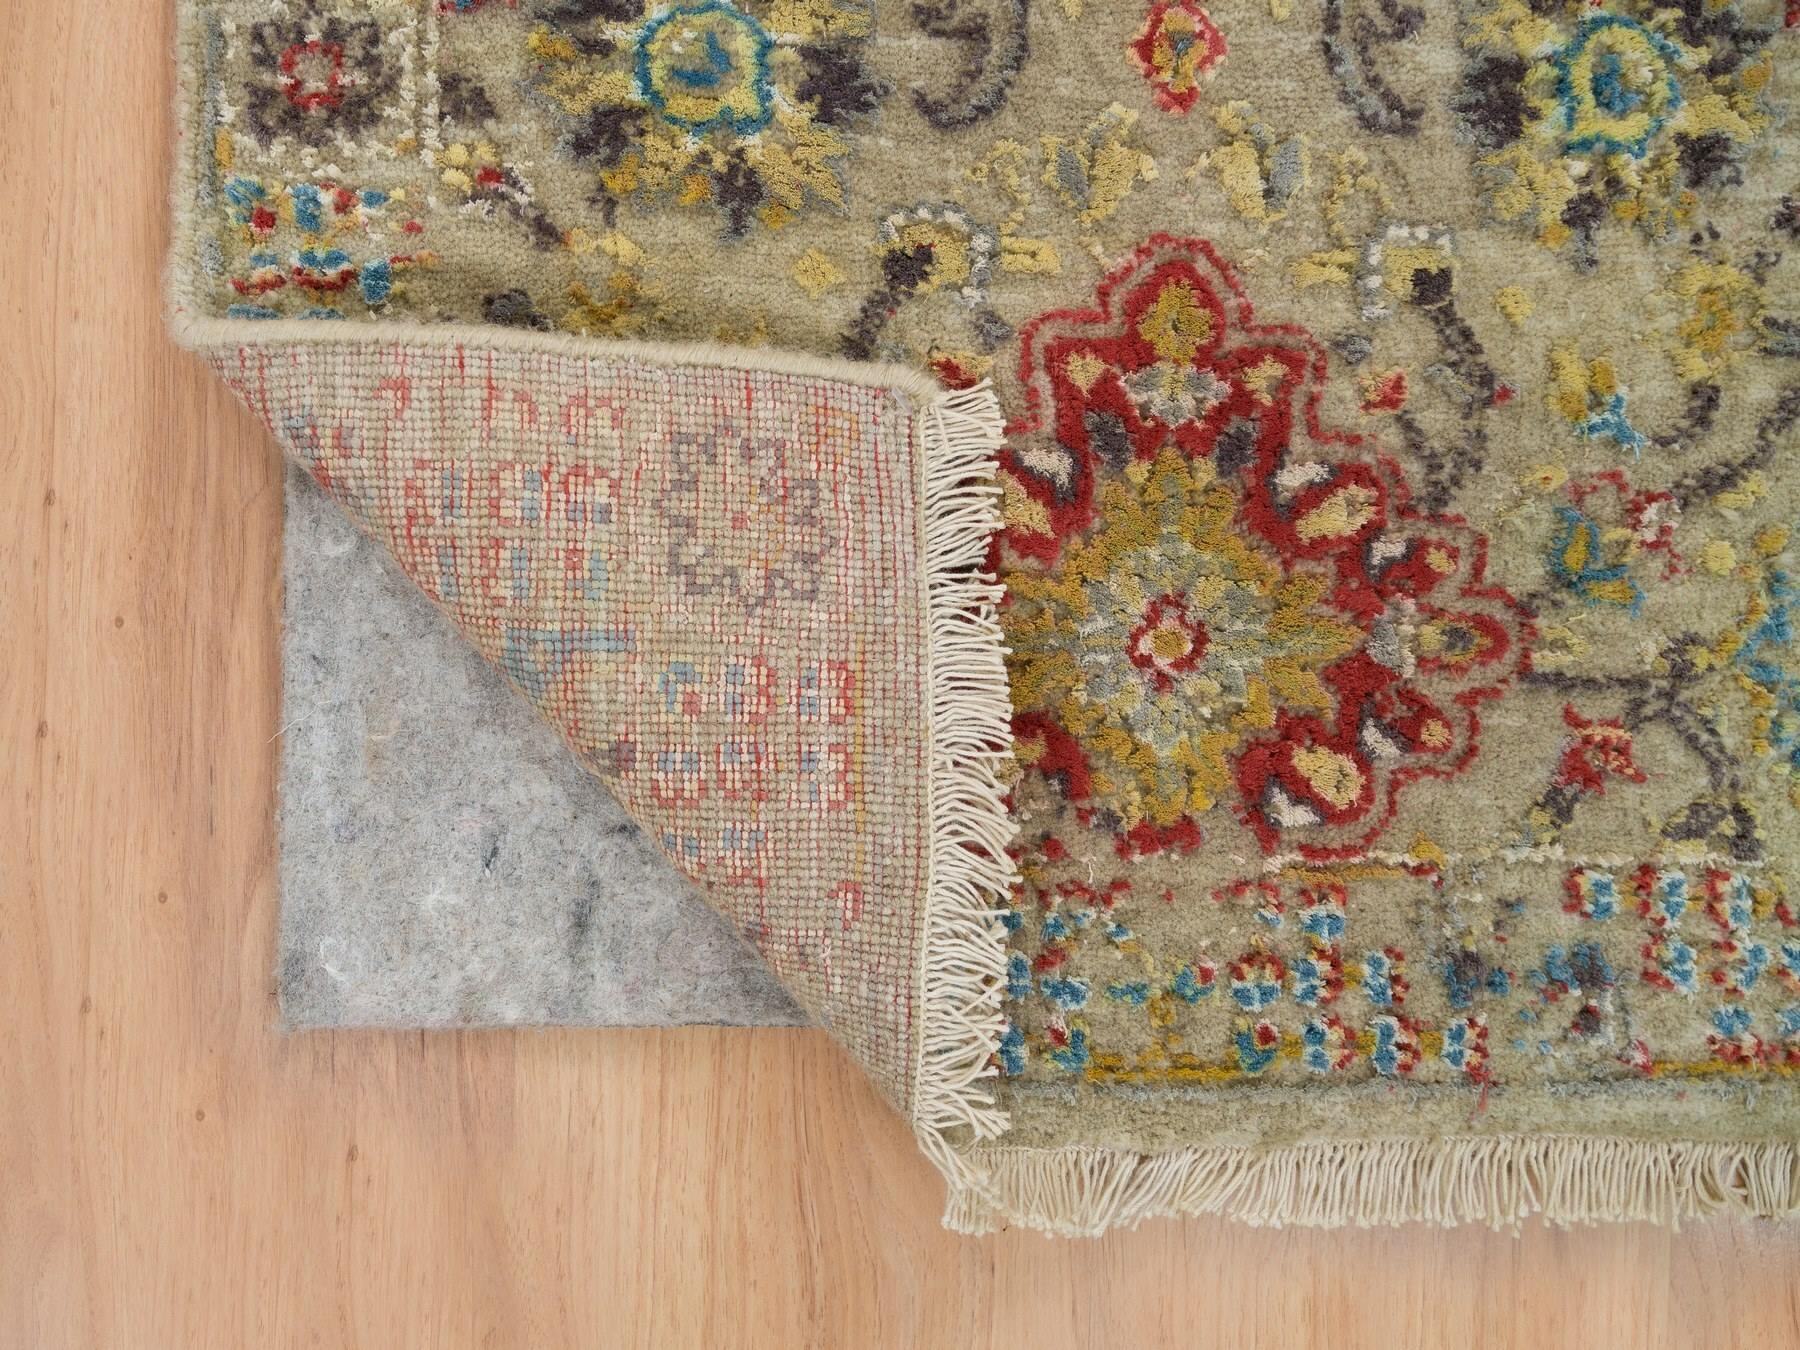 Transitional Rugs LUV592983